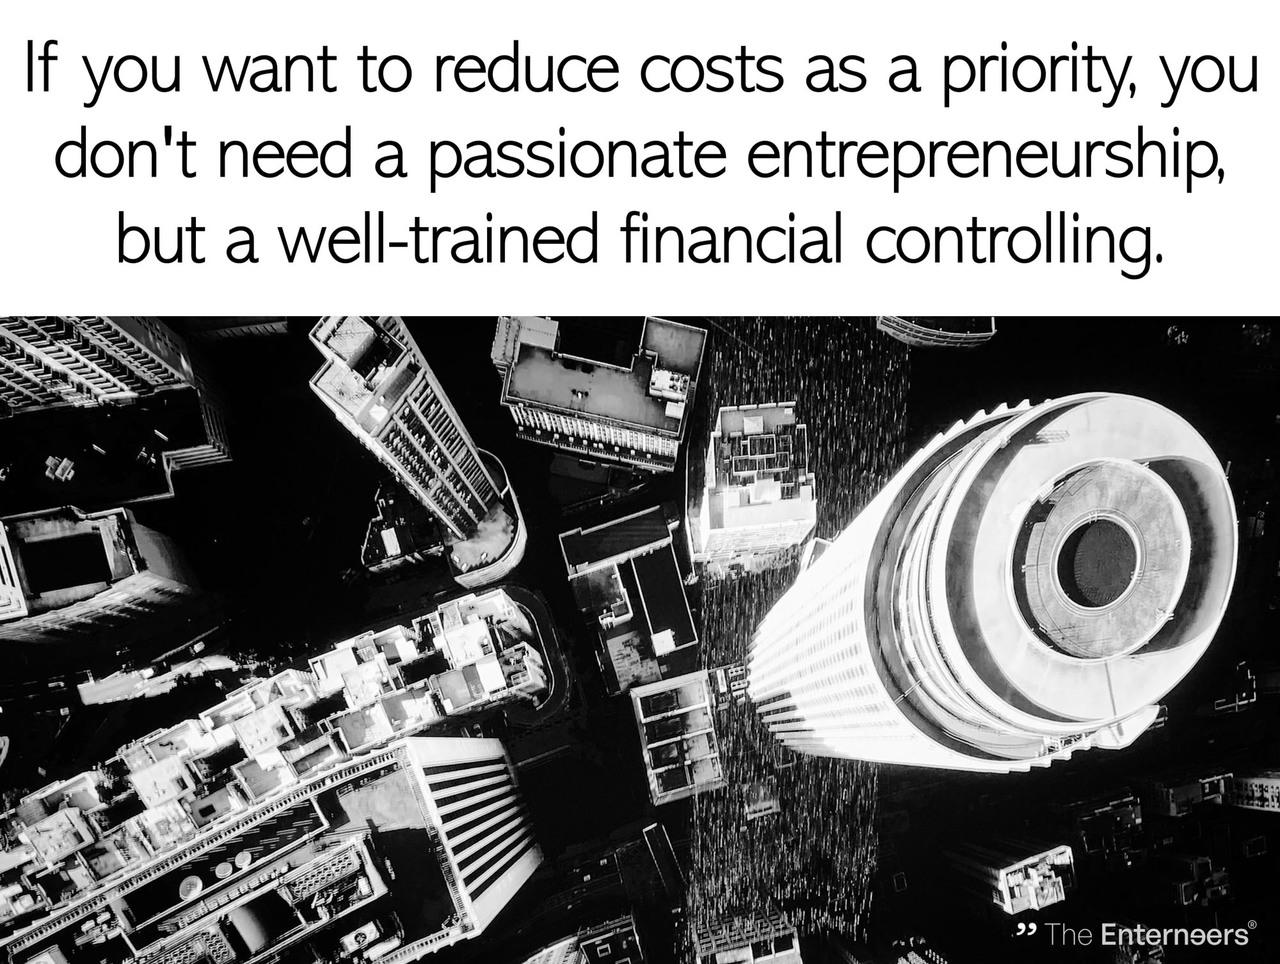 Reducing costs as a priority need financial controlling